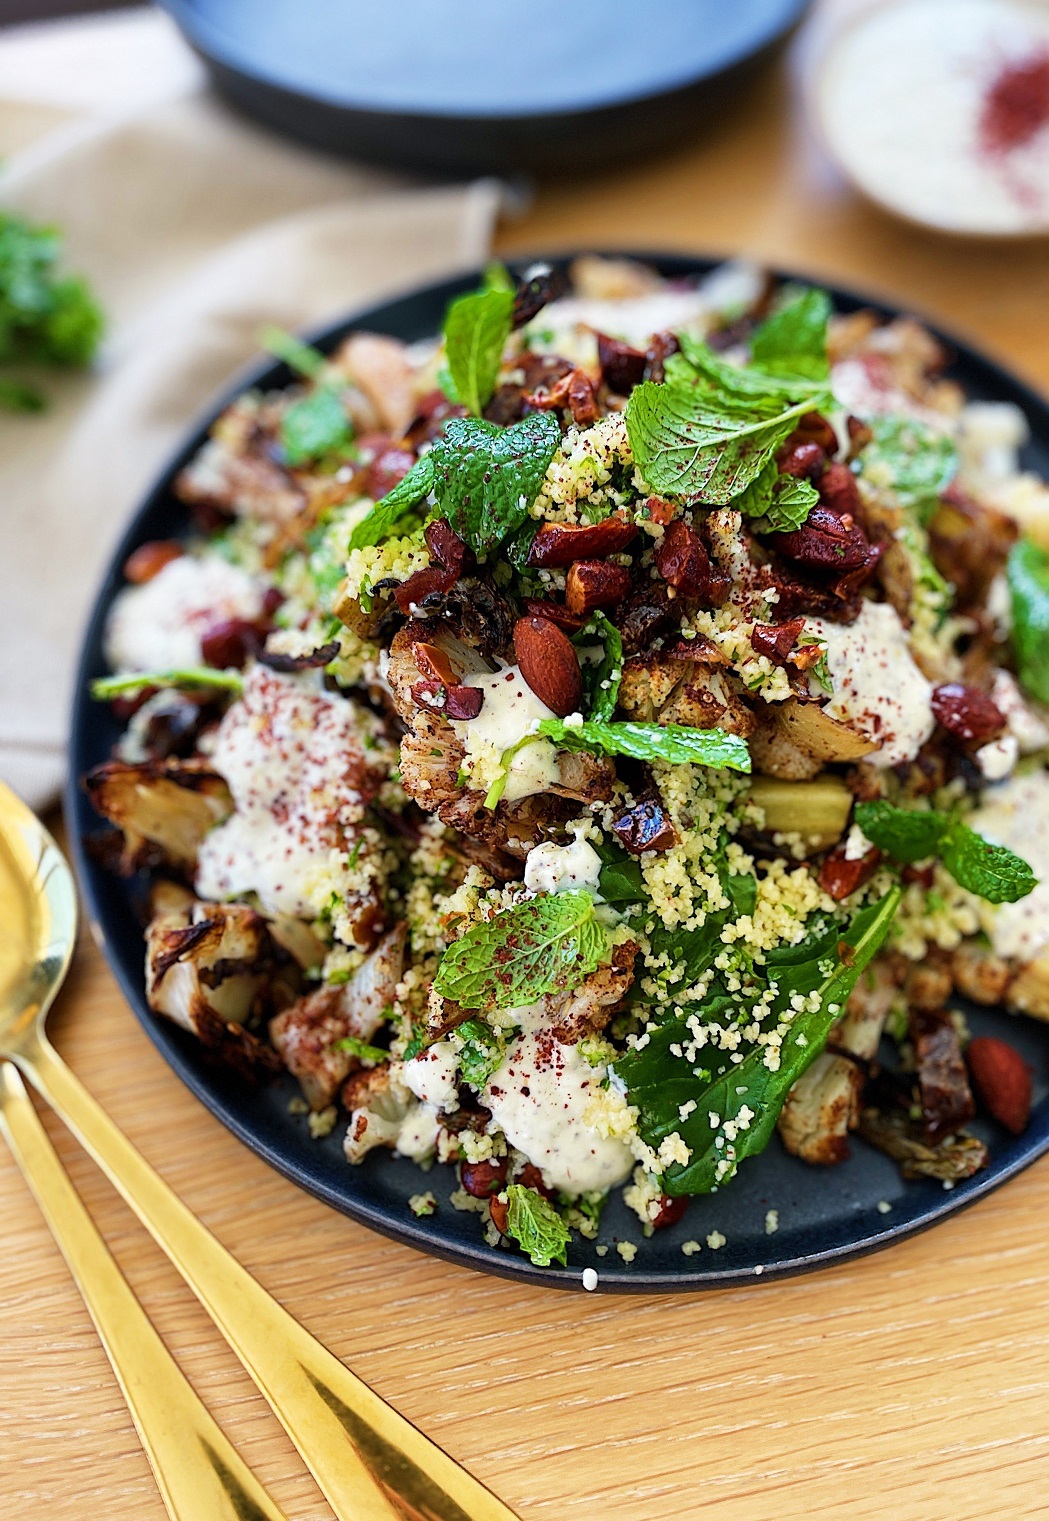 Za’atar roasted cauliflower and couscous salad with dates, almonds and sumac yoghurt. PHOTOS:...